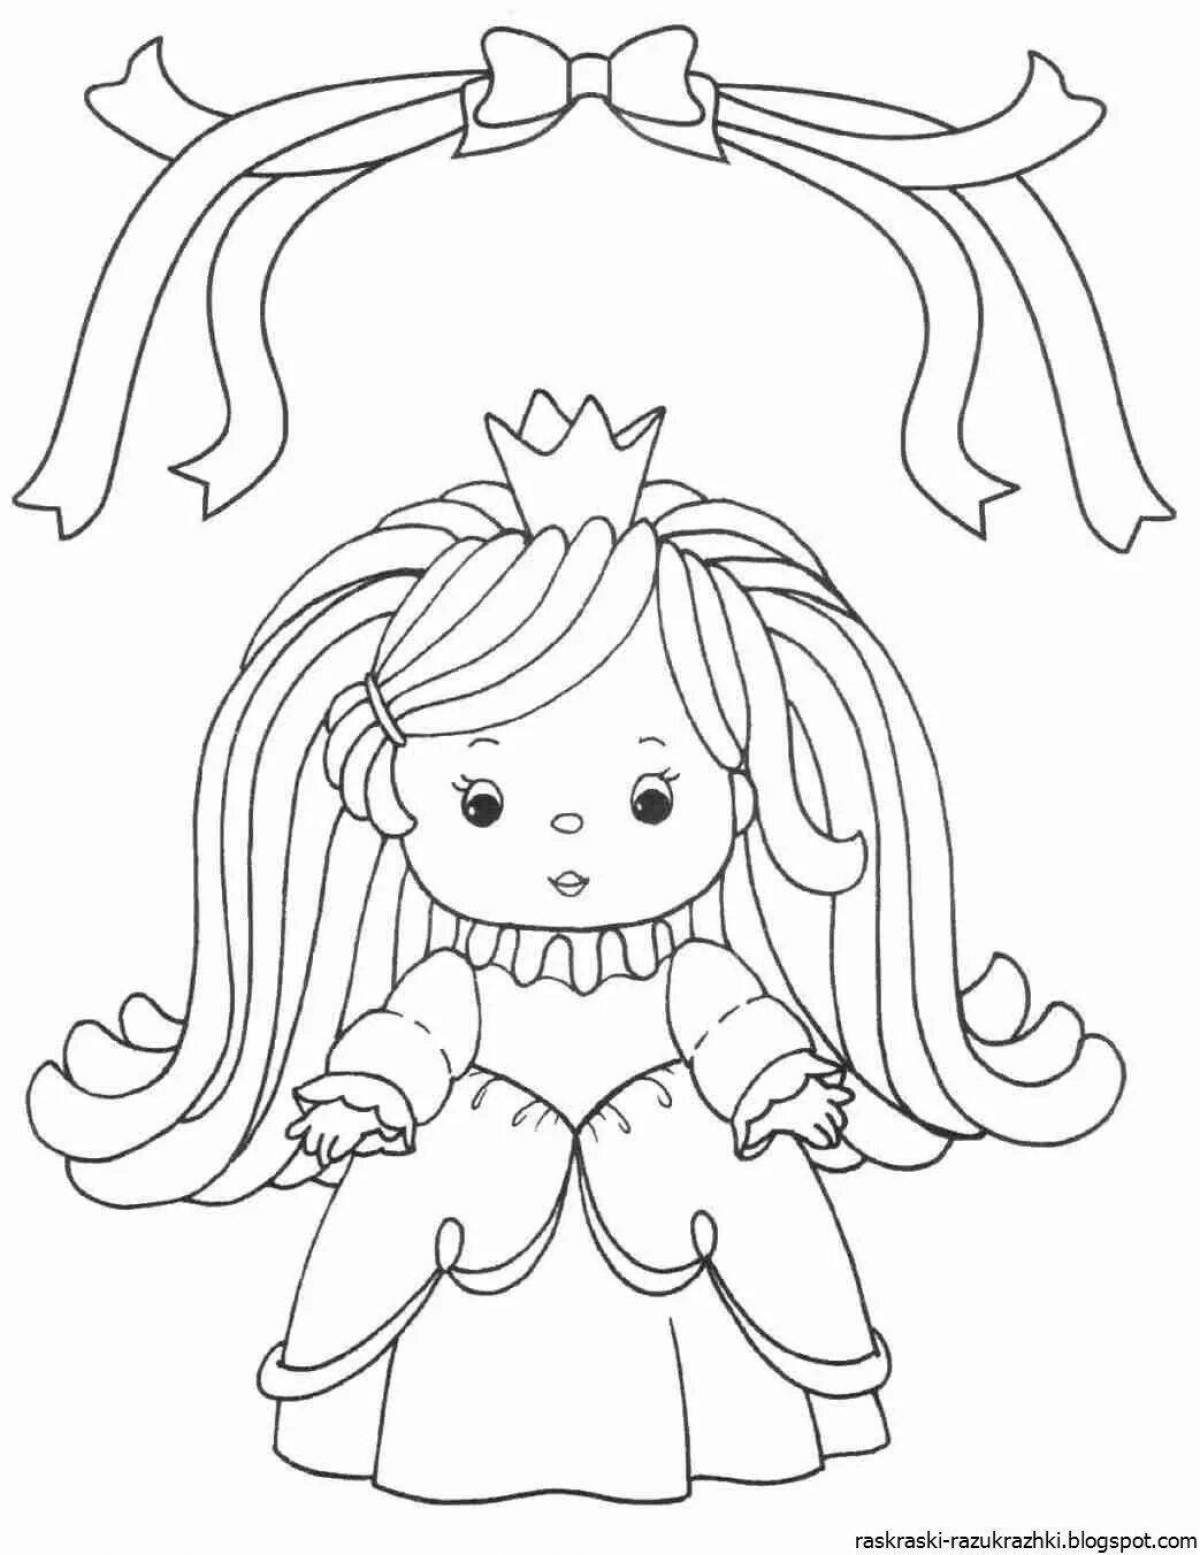 Sparkly coloring doll for children